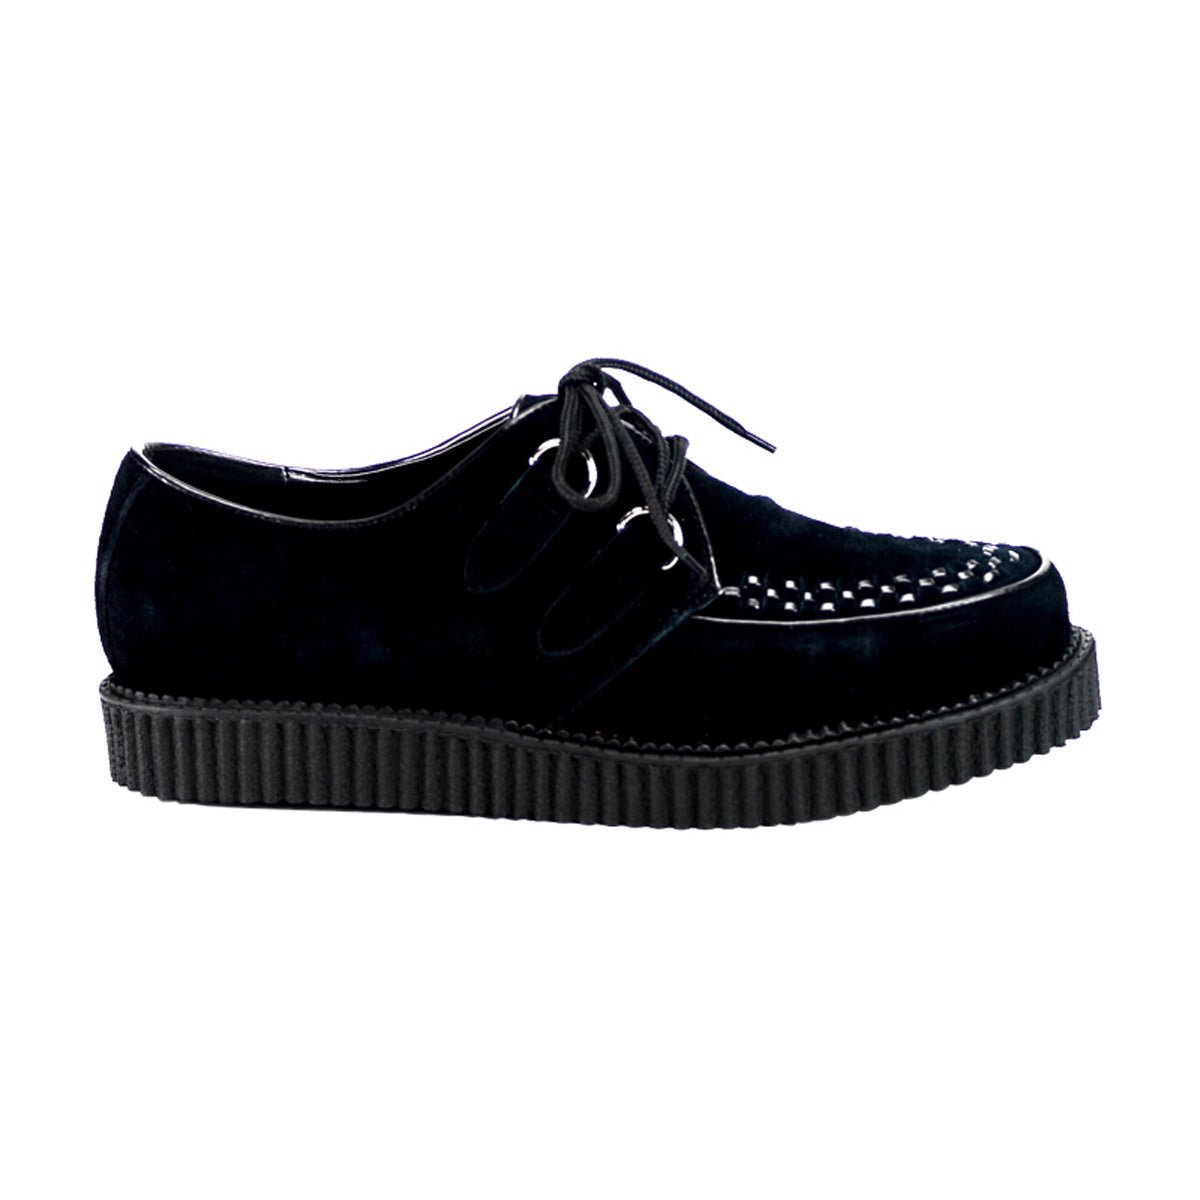 Clearance DemoniaCult Creeper 602S Black Suede Mens/Unisex Size 7UK/8USA